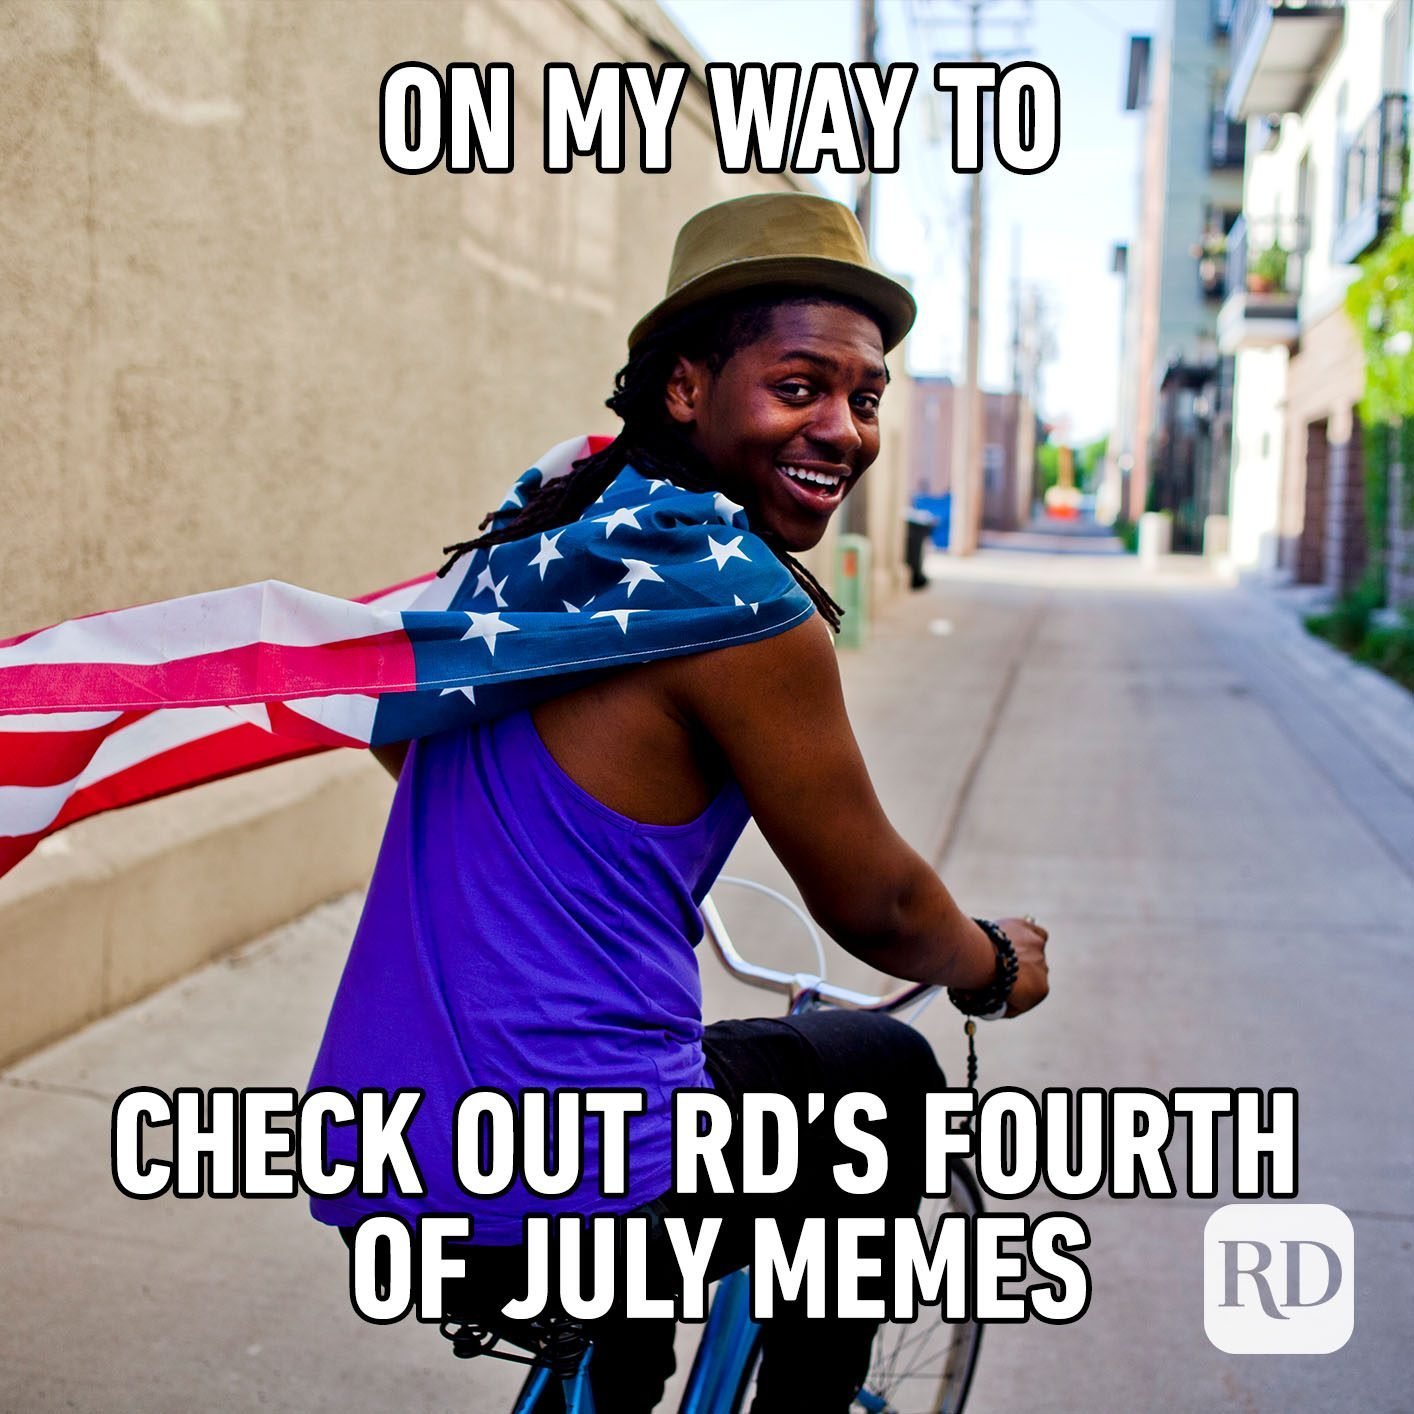 44 Funny 4th of July Memes to Celebrate Independence Day